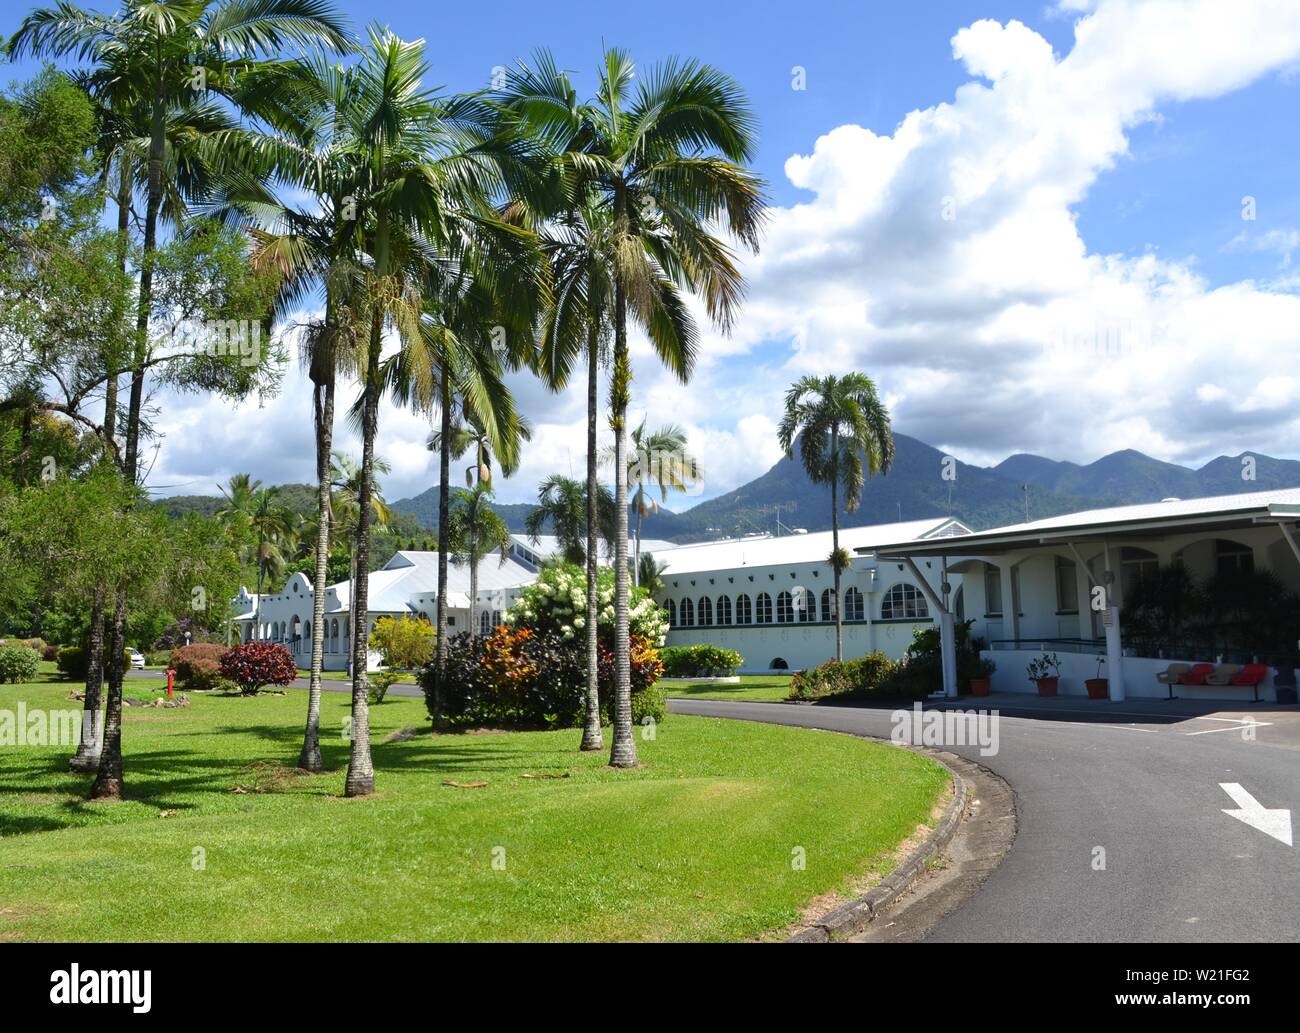 Regional hospital in the tropical Queensland outback town of Mossman in distinctive art deco architectural style Stock Photo